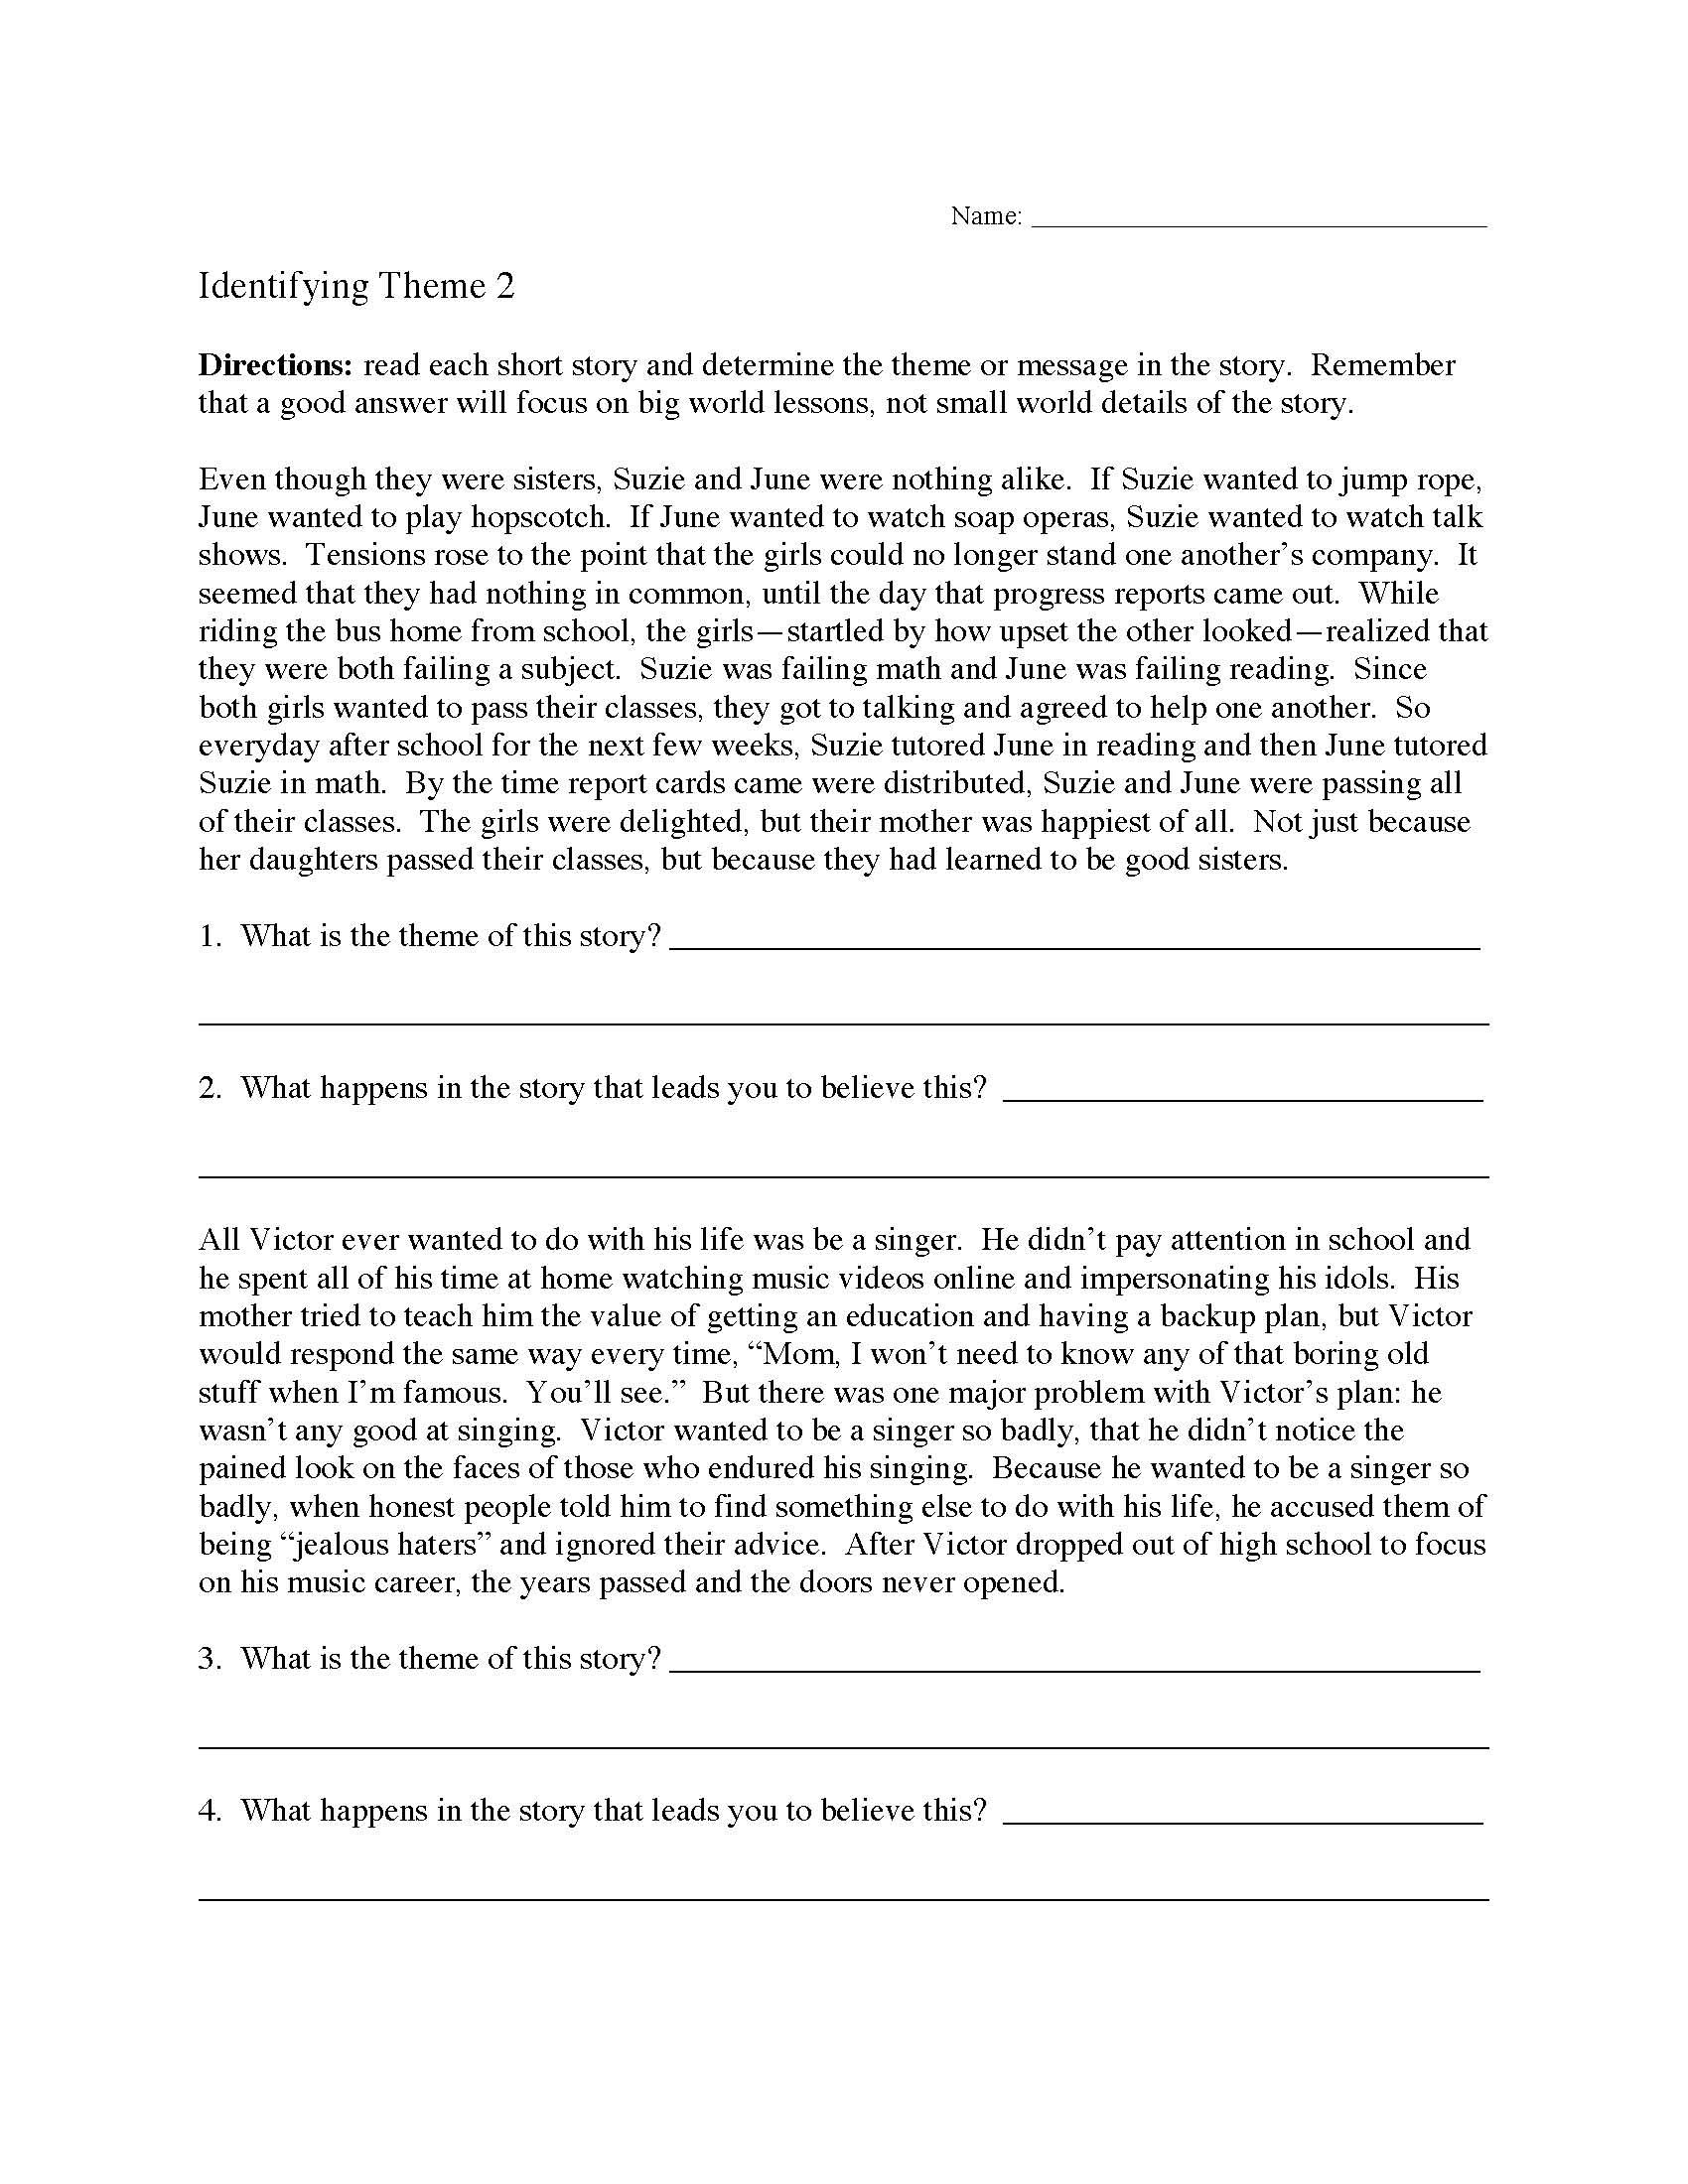 theme-worksheet-2-preview